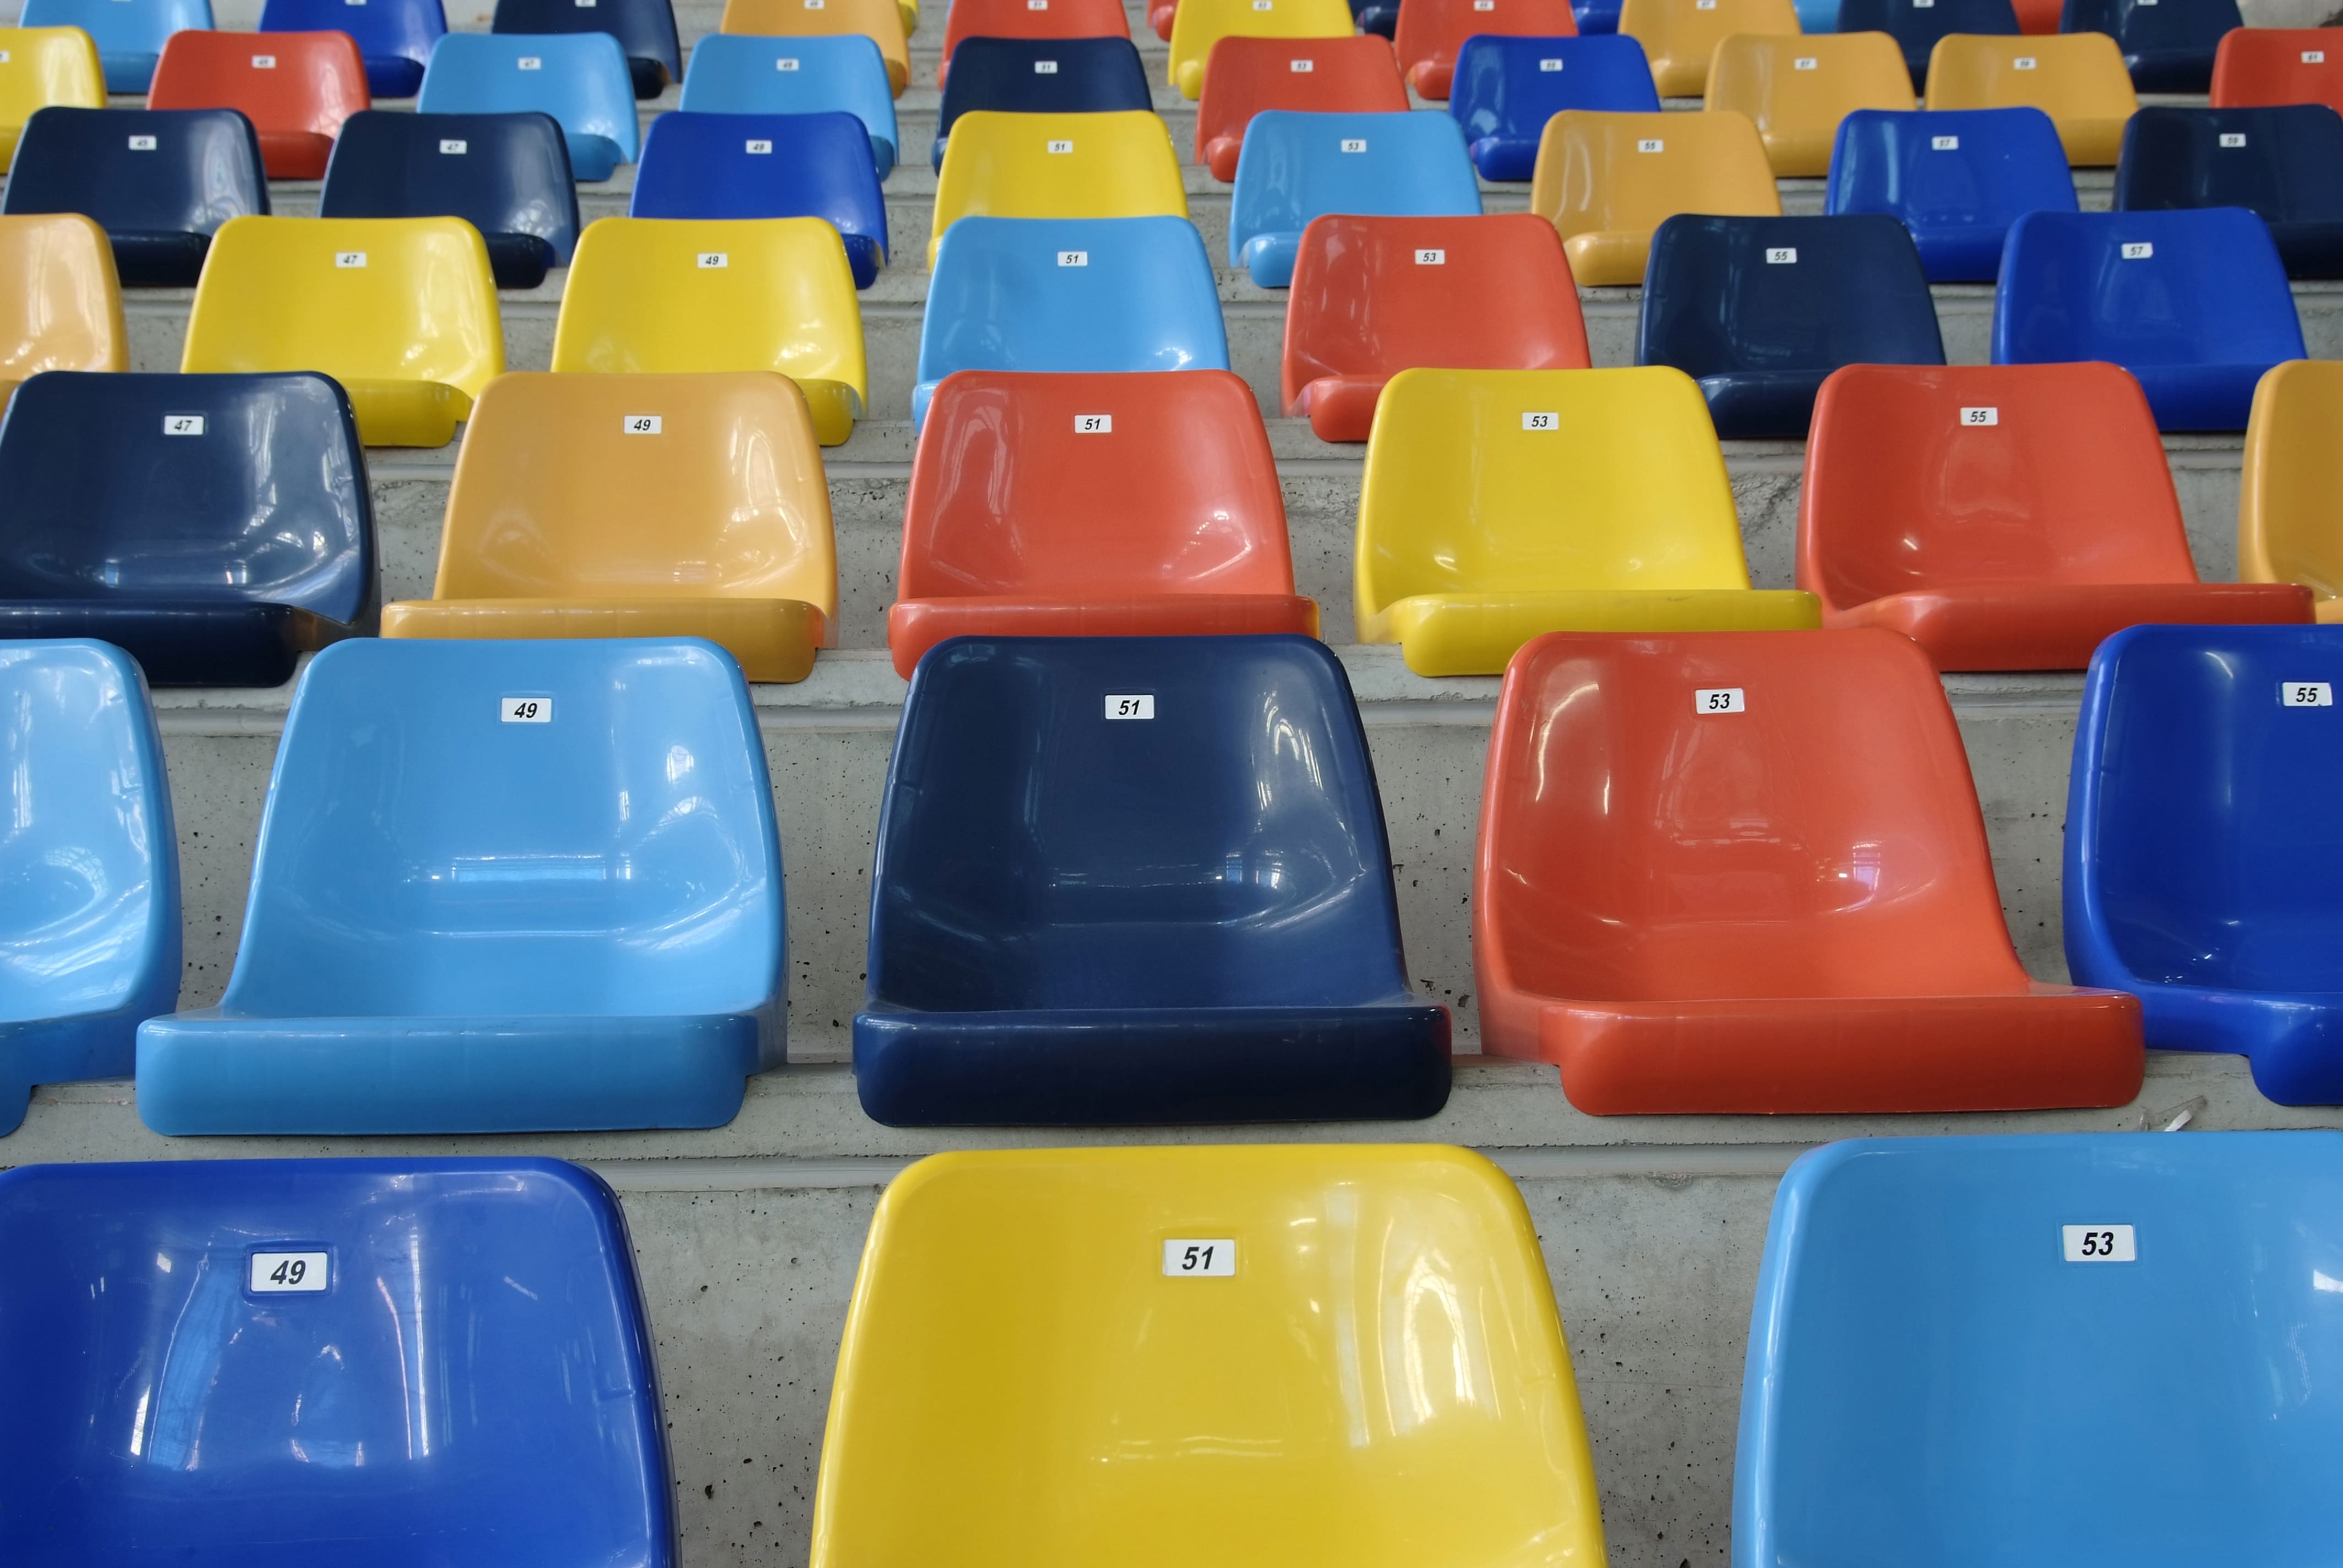 Life cycle of seats in sports stadiums